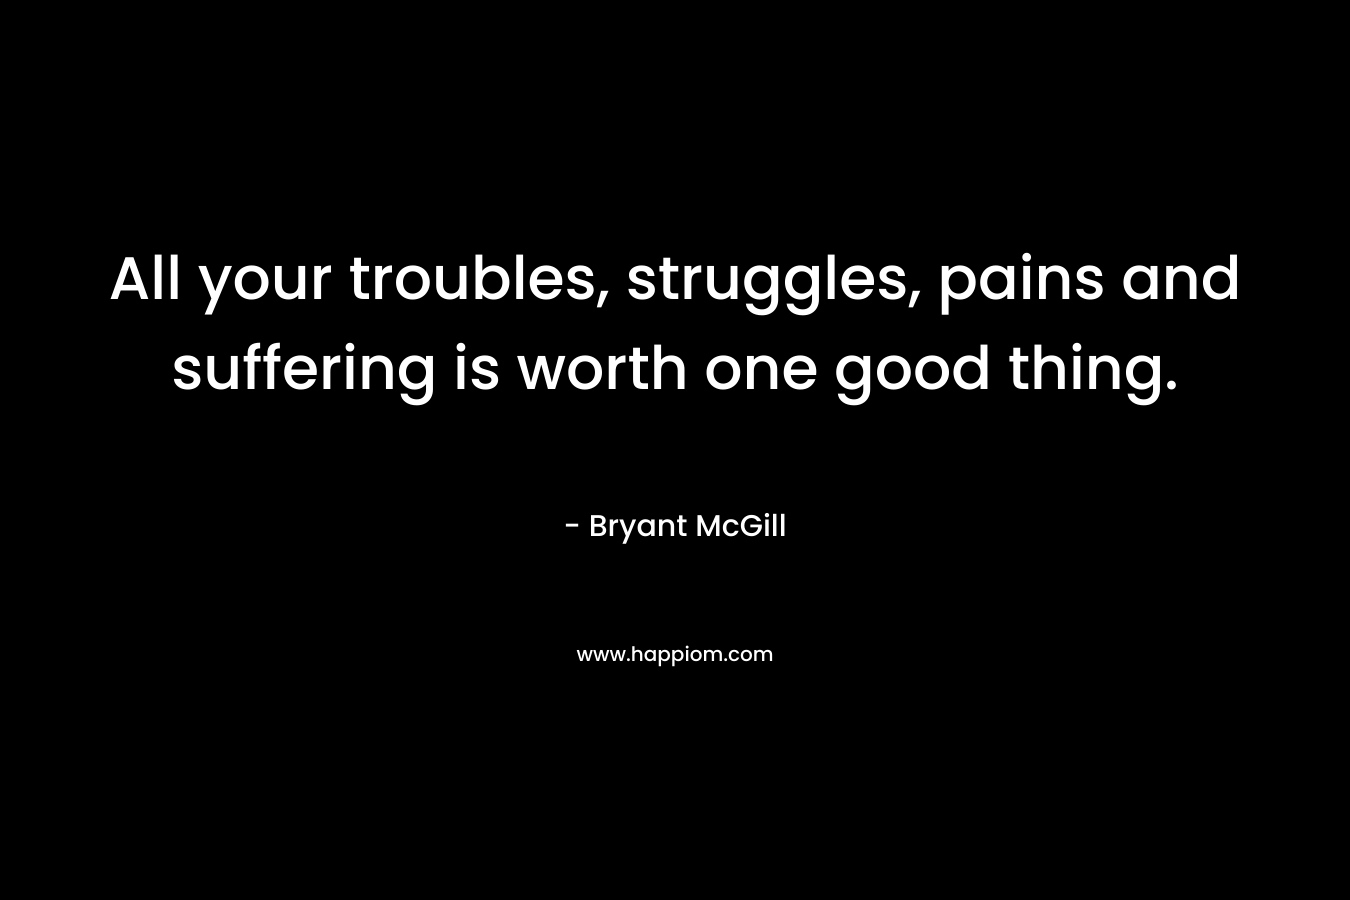 All your troubles, struggles, pains and suffering is worth one good thing. – Bryant McGill